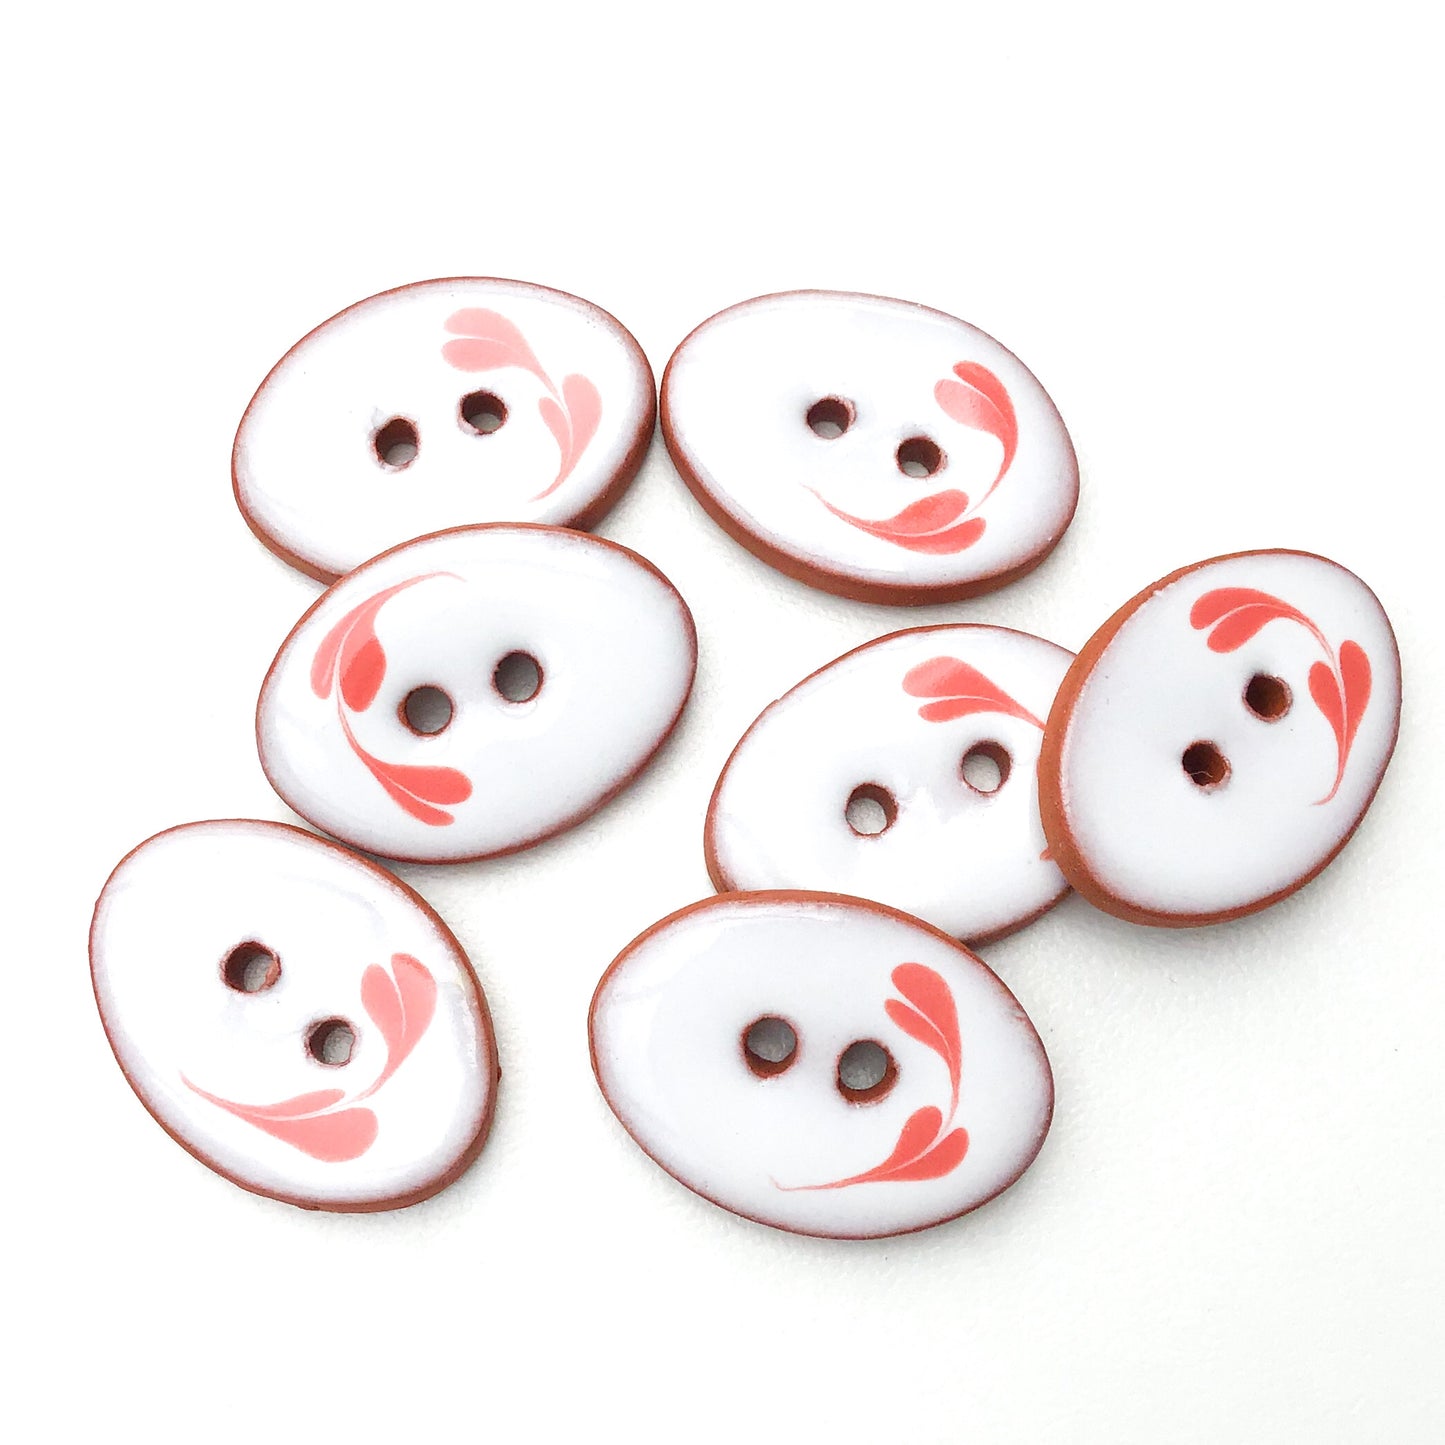 Oval Ceramic Buttons - Hand Painted Clay Buttons with Small Flower Detail - White + Pink - 5/8" x 7/8" - 7 Pack (ws-146)